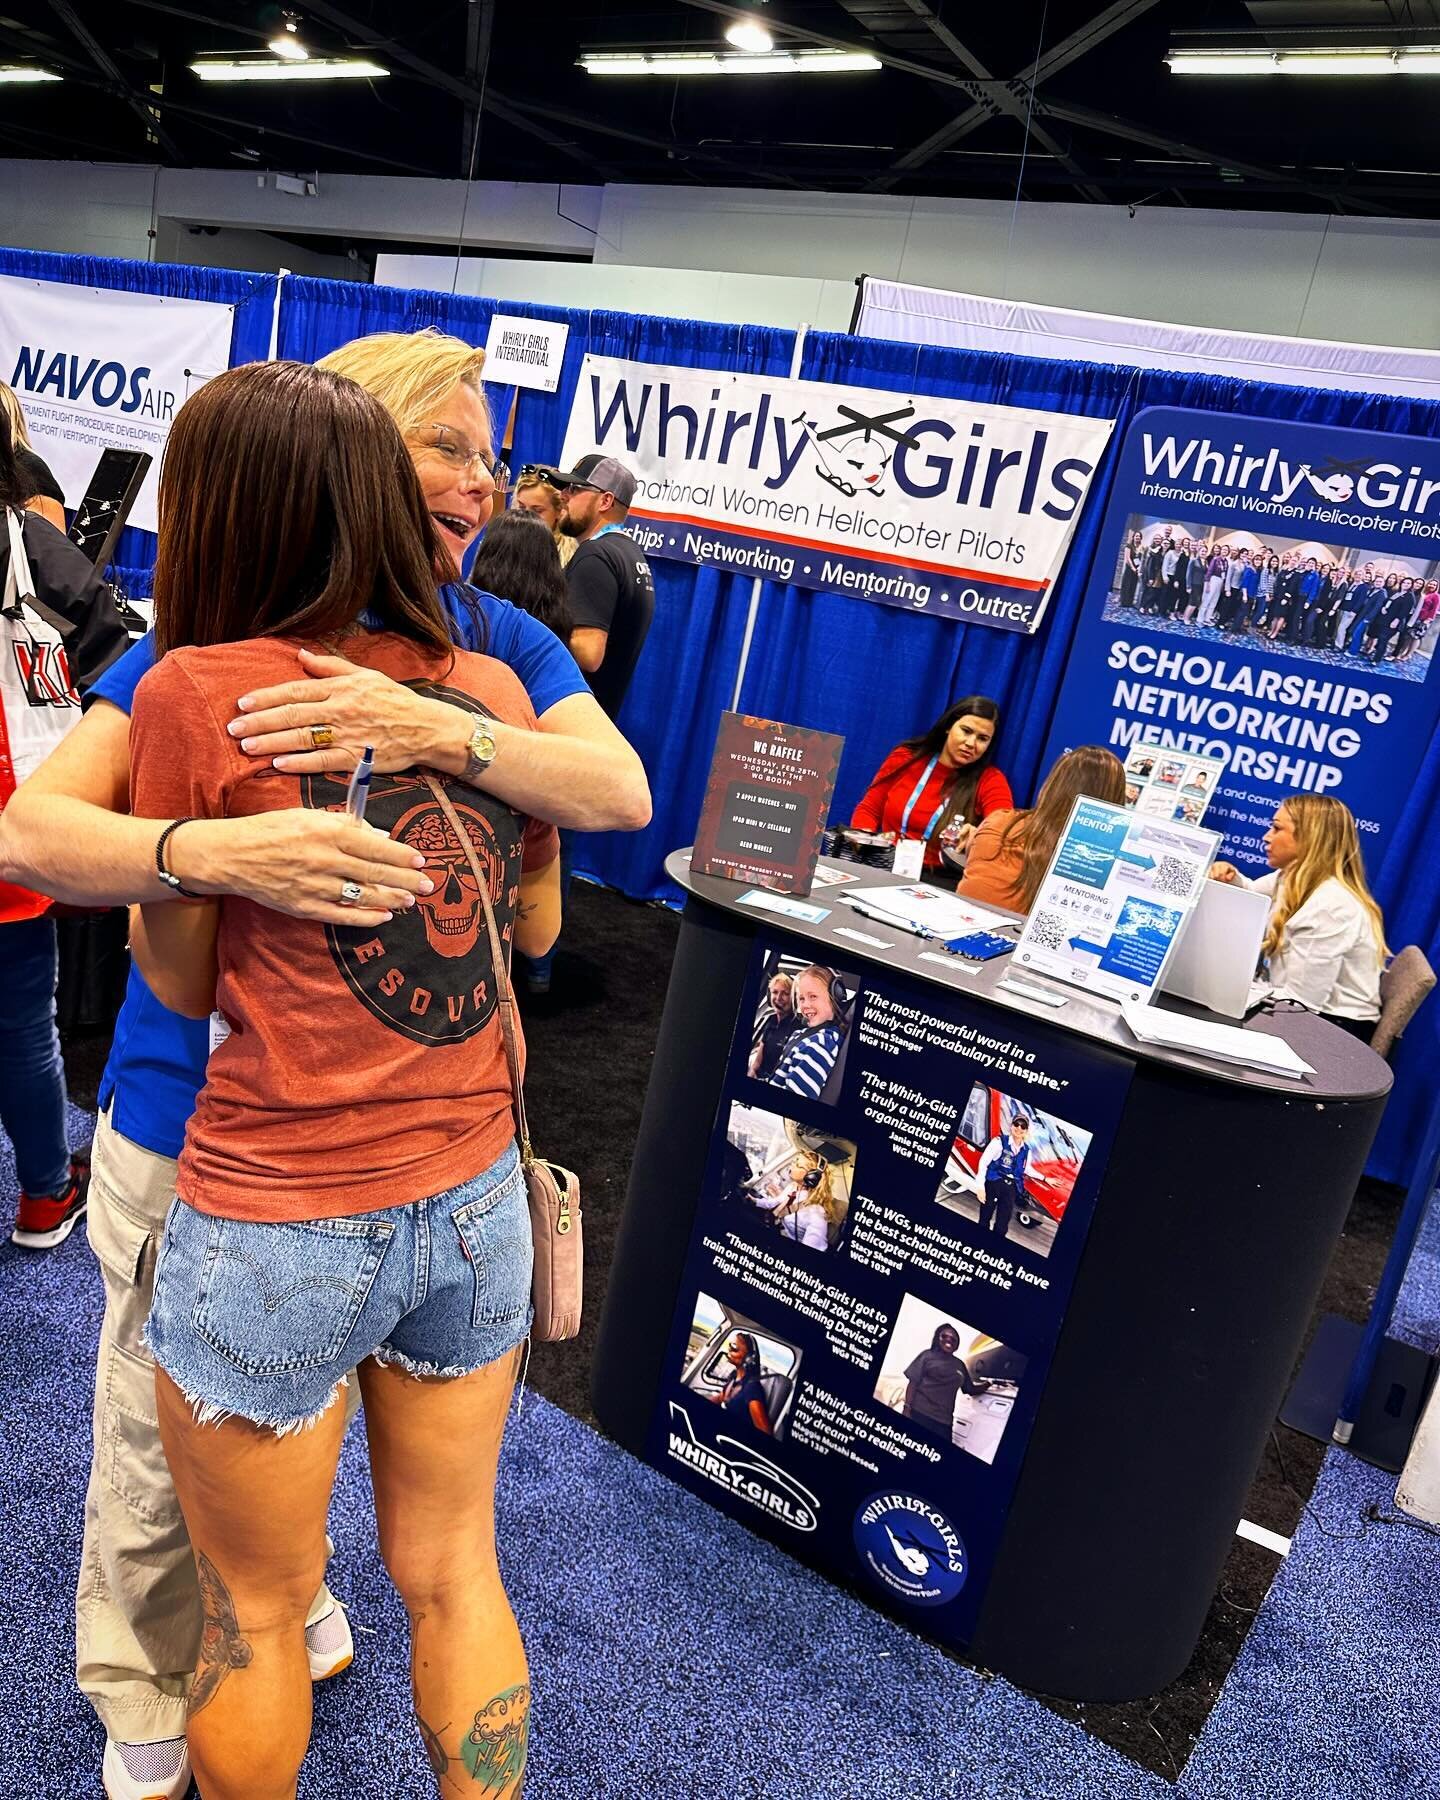 @rotorheadresources is a 501c3 nonprofit who&rsquo;s mission is to help both male and female helicopter pilots, without membership fees. 

As female pilots, we fully understand the industry is heavily male dominated. @whirly_girls_intl is one of the 